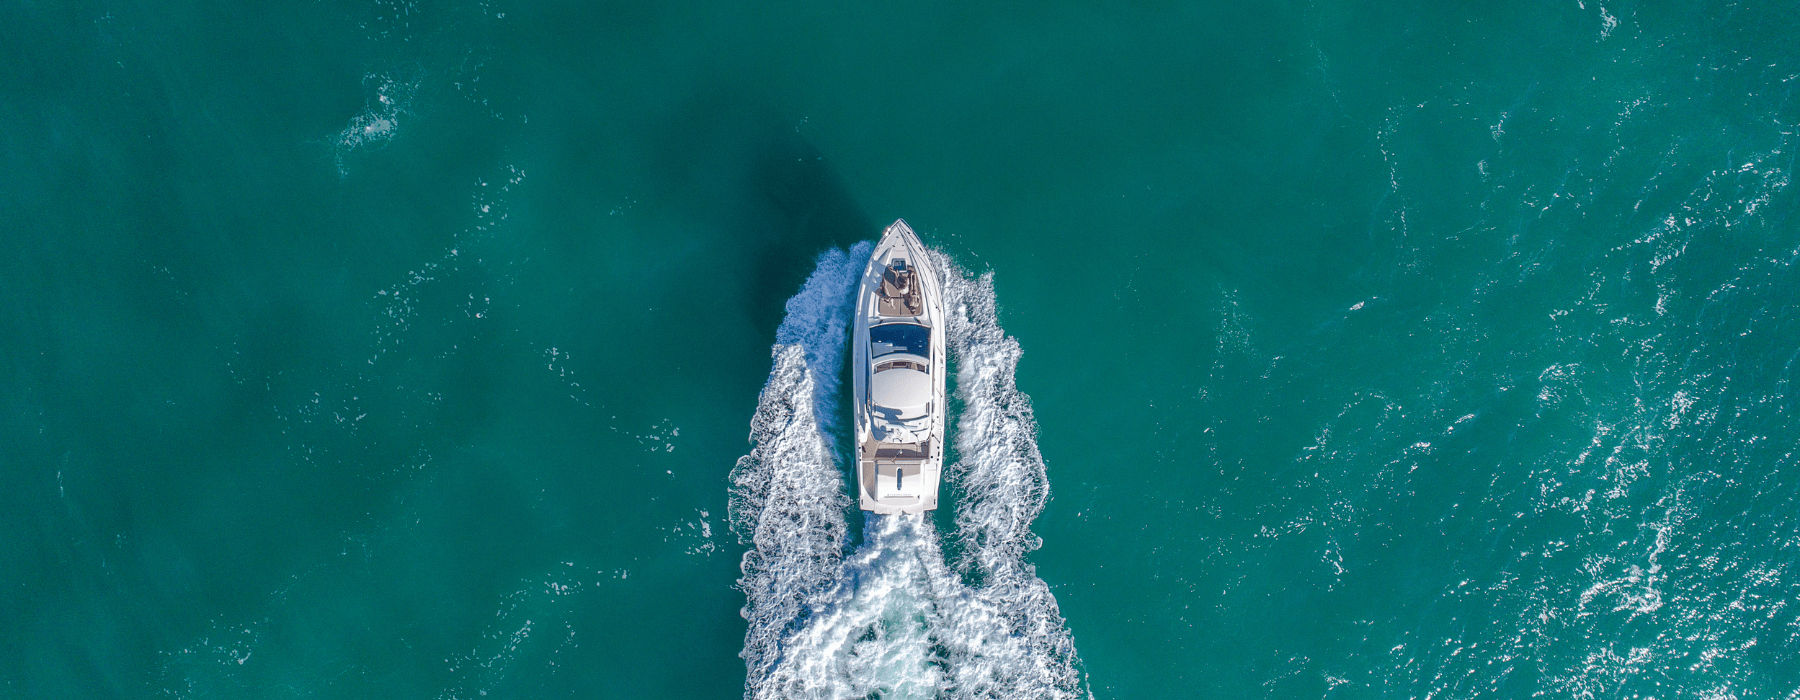 lifestyle image of a boat on open waters